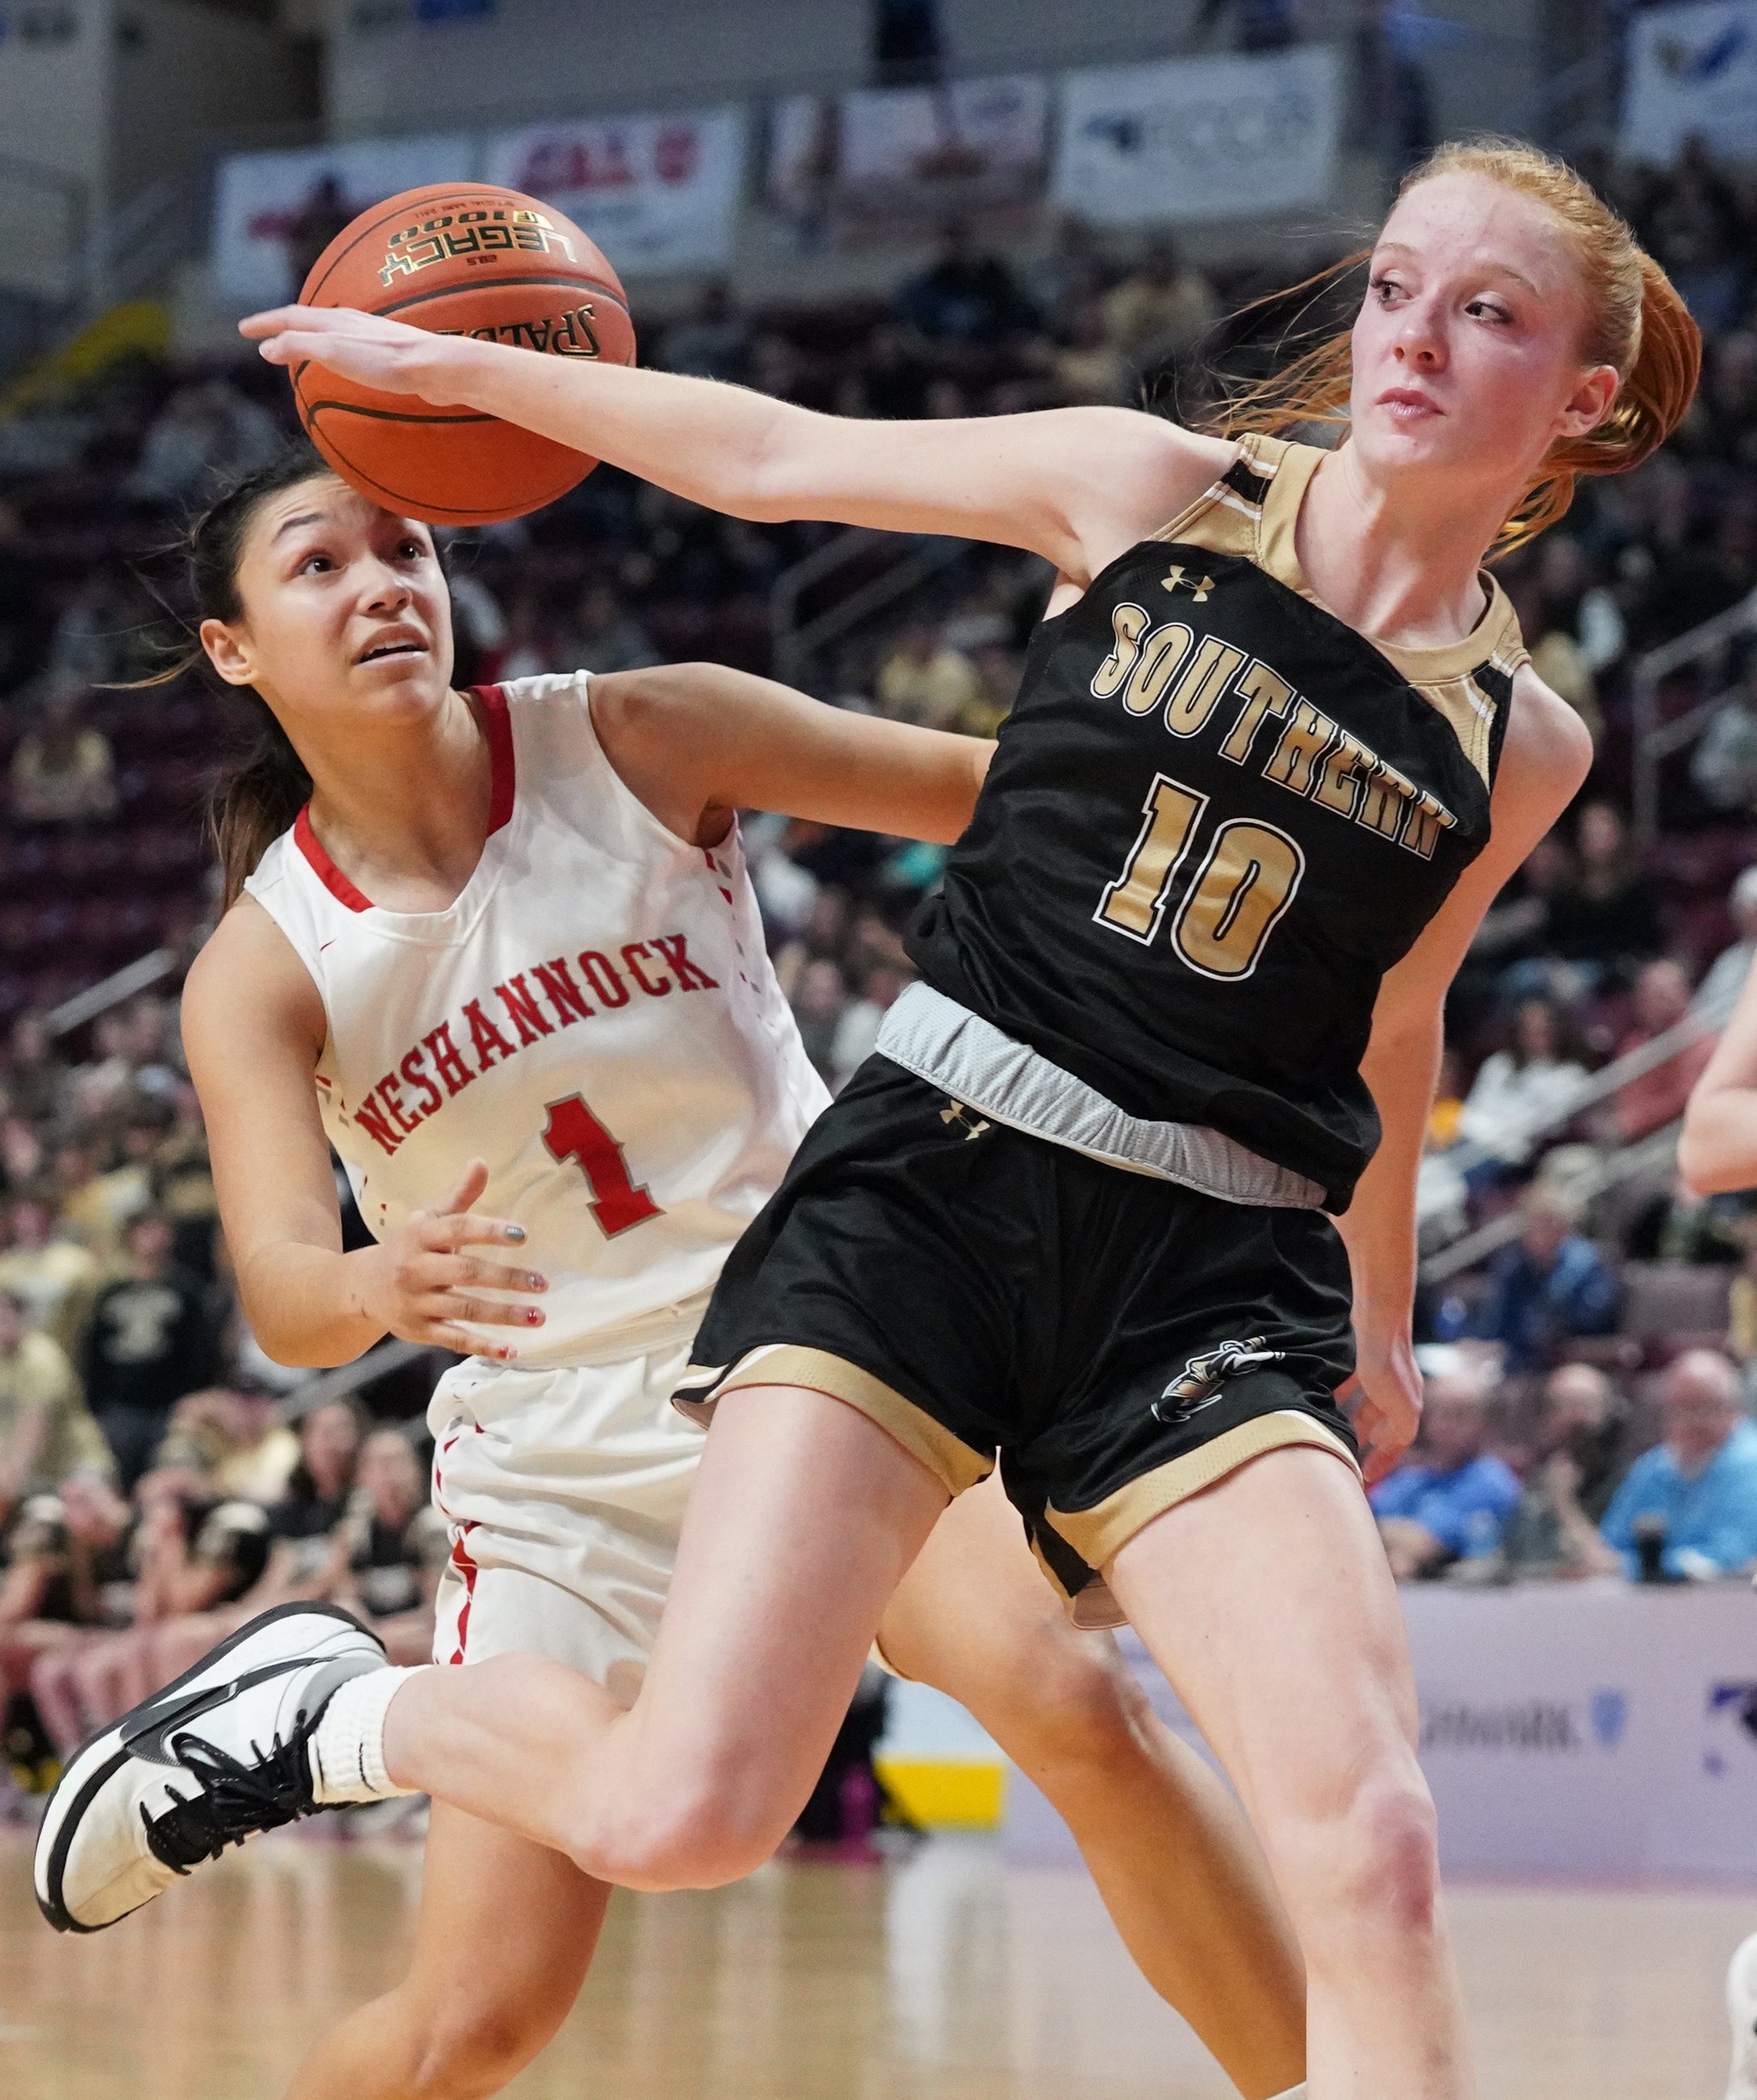  Neshannock’s Neleh Nogay keeps her eye on the ball as she loses control of it against Southern Columbia’s Cassidy Savitski in the PIAA 2A girls basketball championship on Friday, March 25, 2022, at Giant Center in Hershey, Pa. Neshannock won 62-56. 